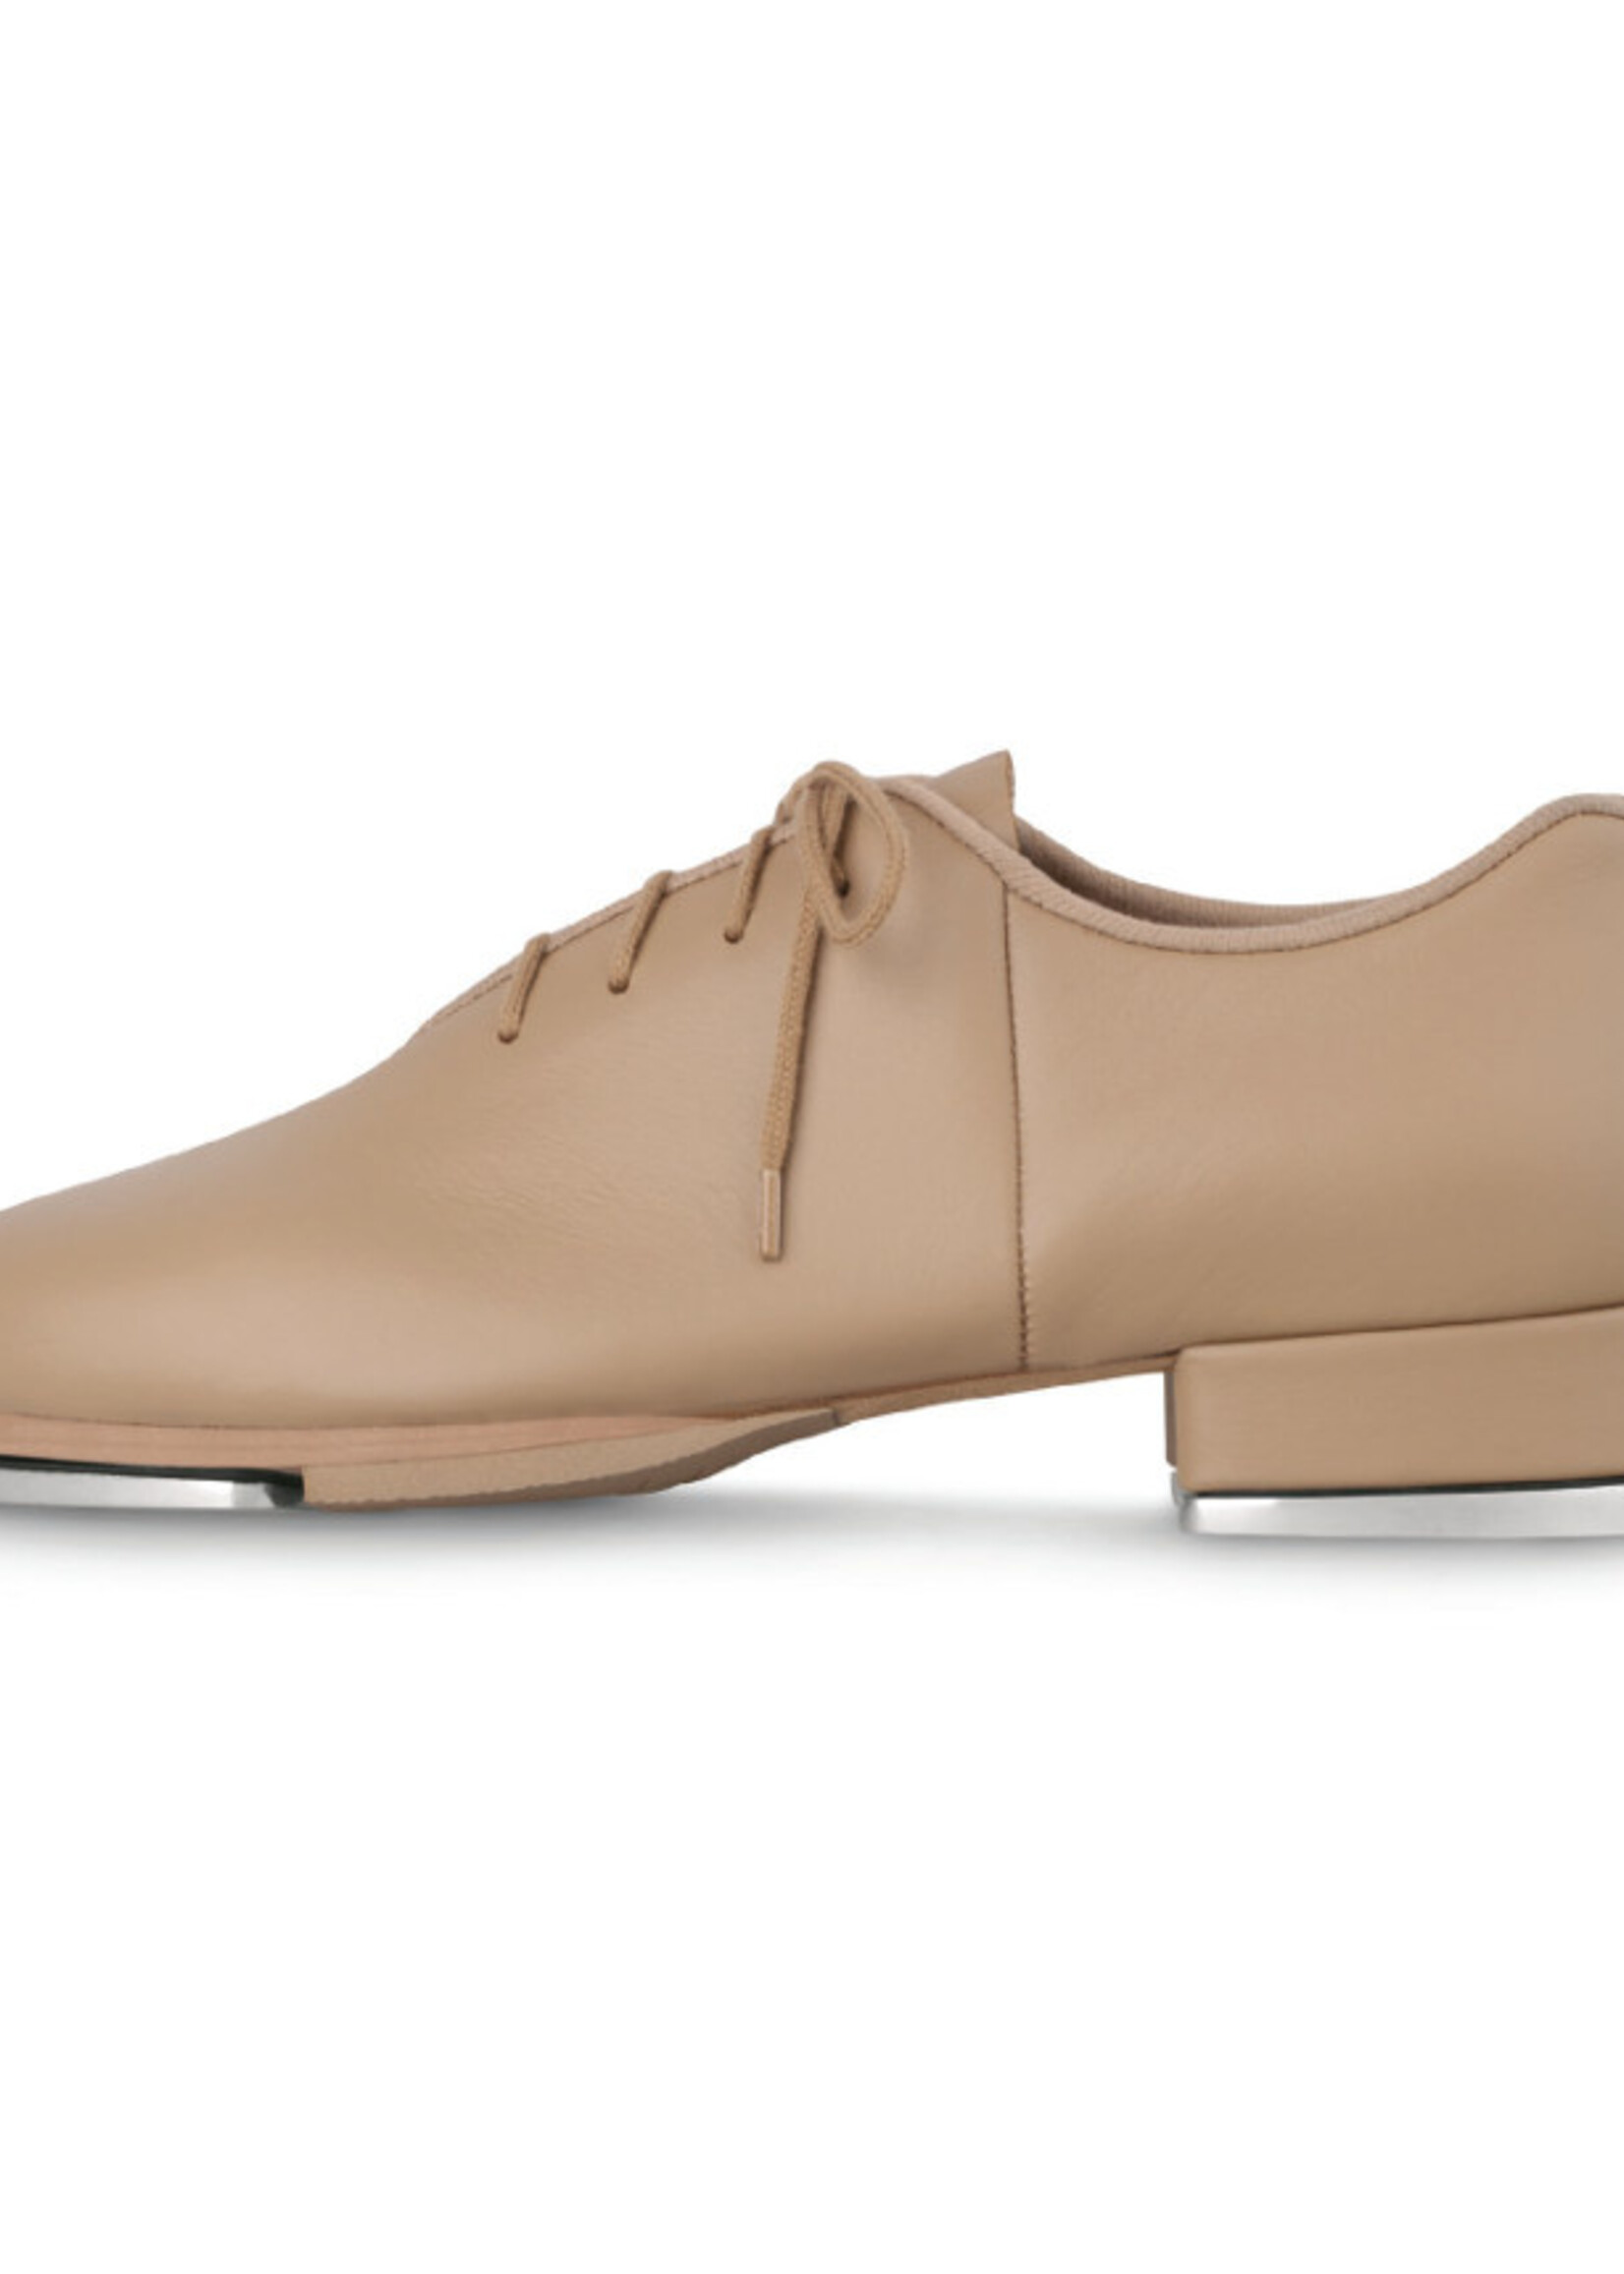 Bloch Sync Jazz Lace Up Tap Shoe